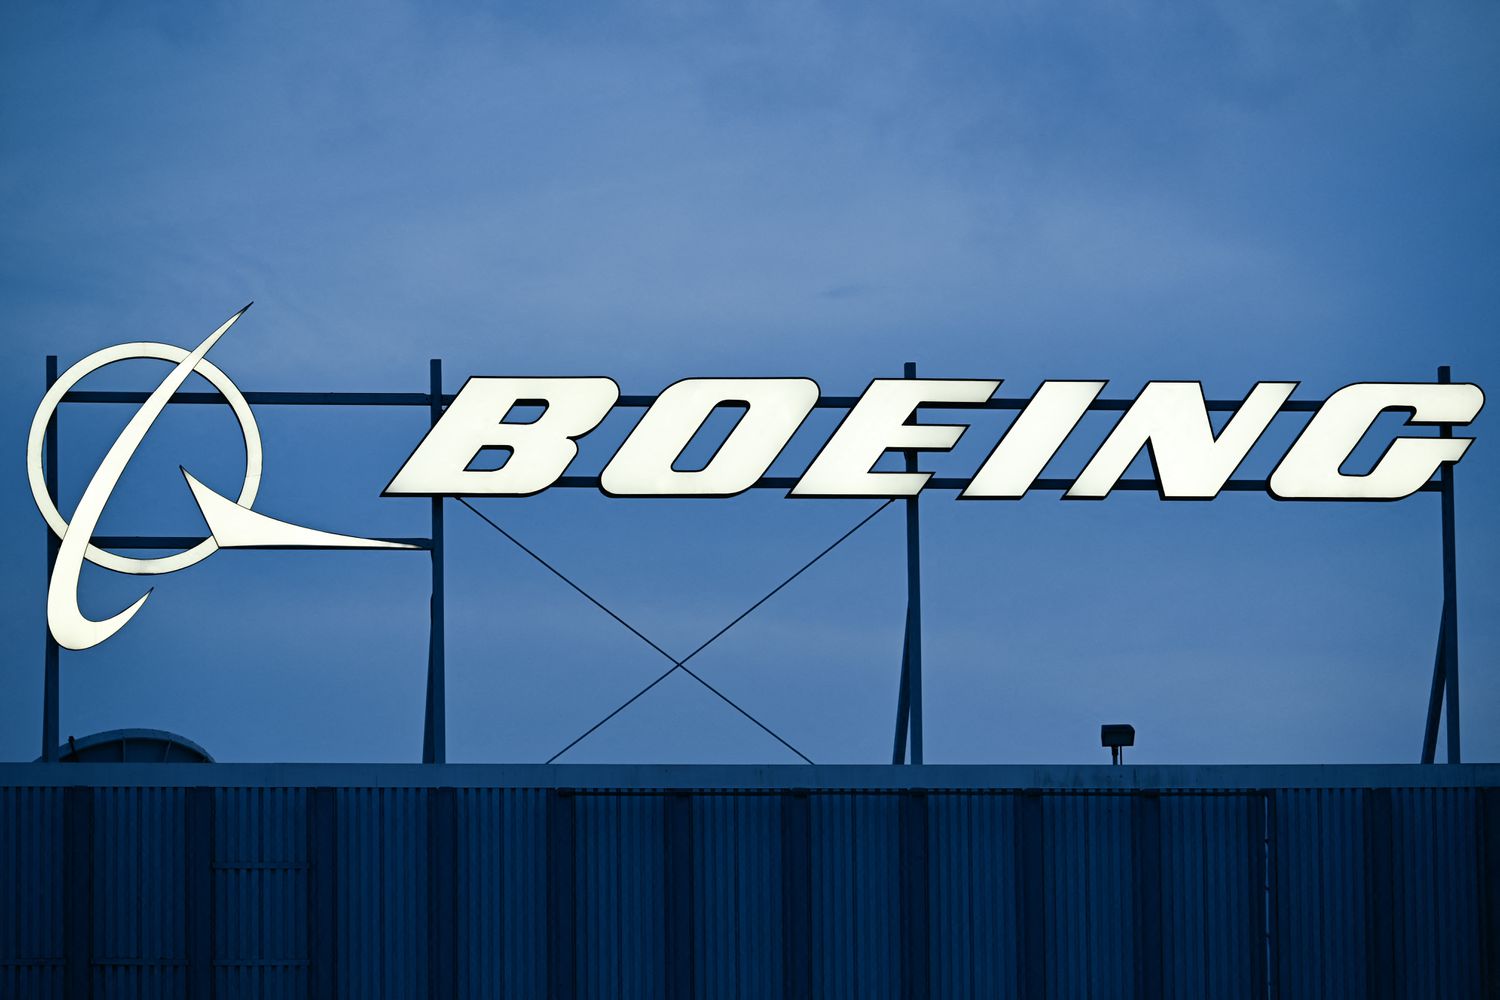 What Boeing’s Earnings Indicate About How the Company Is Weathering Safety Issues [Video]